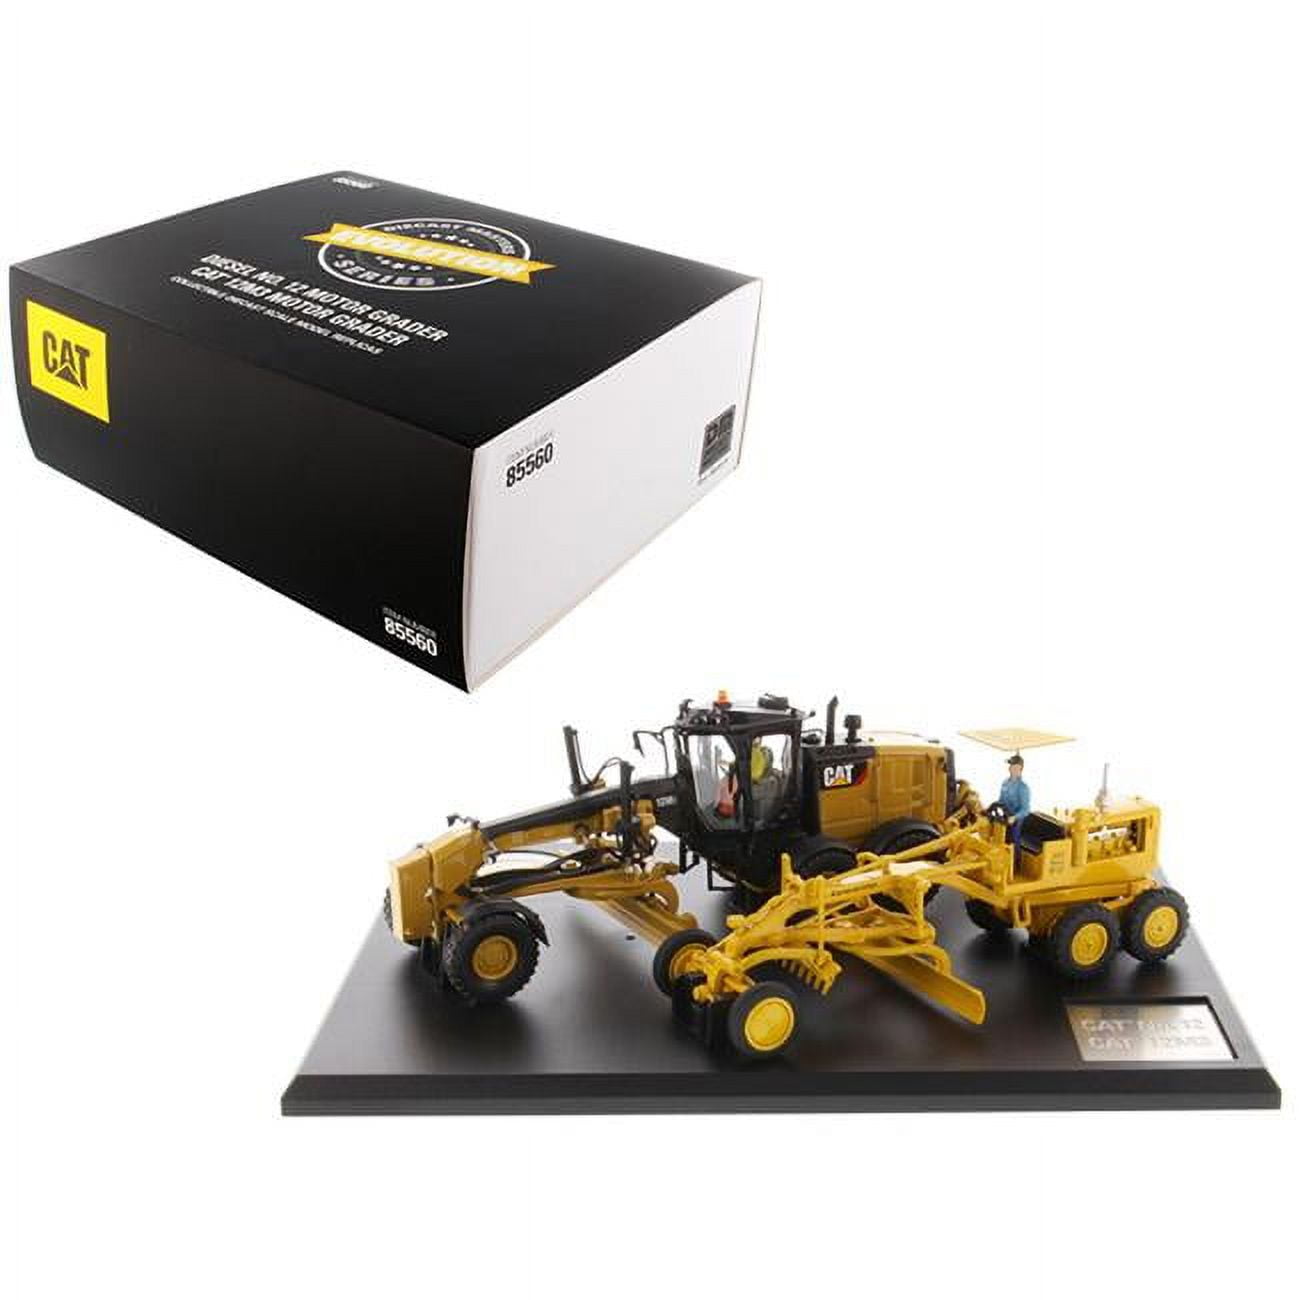 85560 1 By 50 Scale Diecast Motor Grader Circa & Current Operators Evolution Series For 1939-1959 Cat Caterpillar No 12 & 12m3 Model - 2 Piece